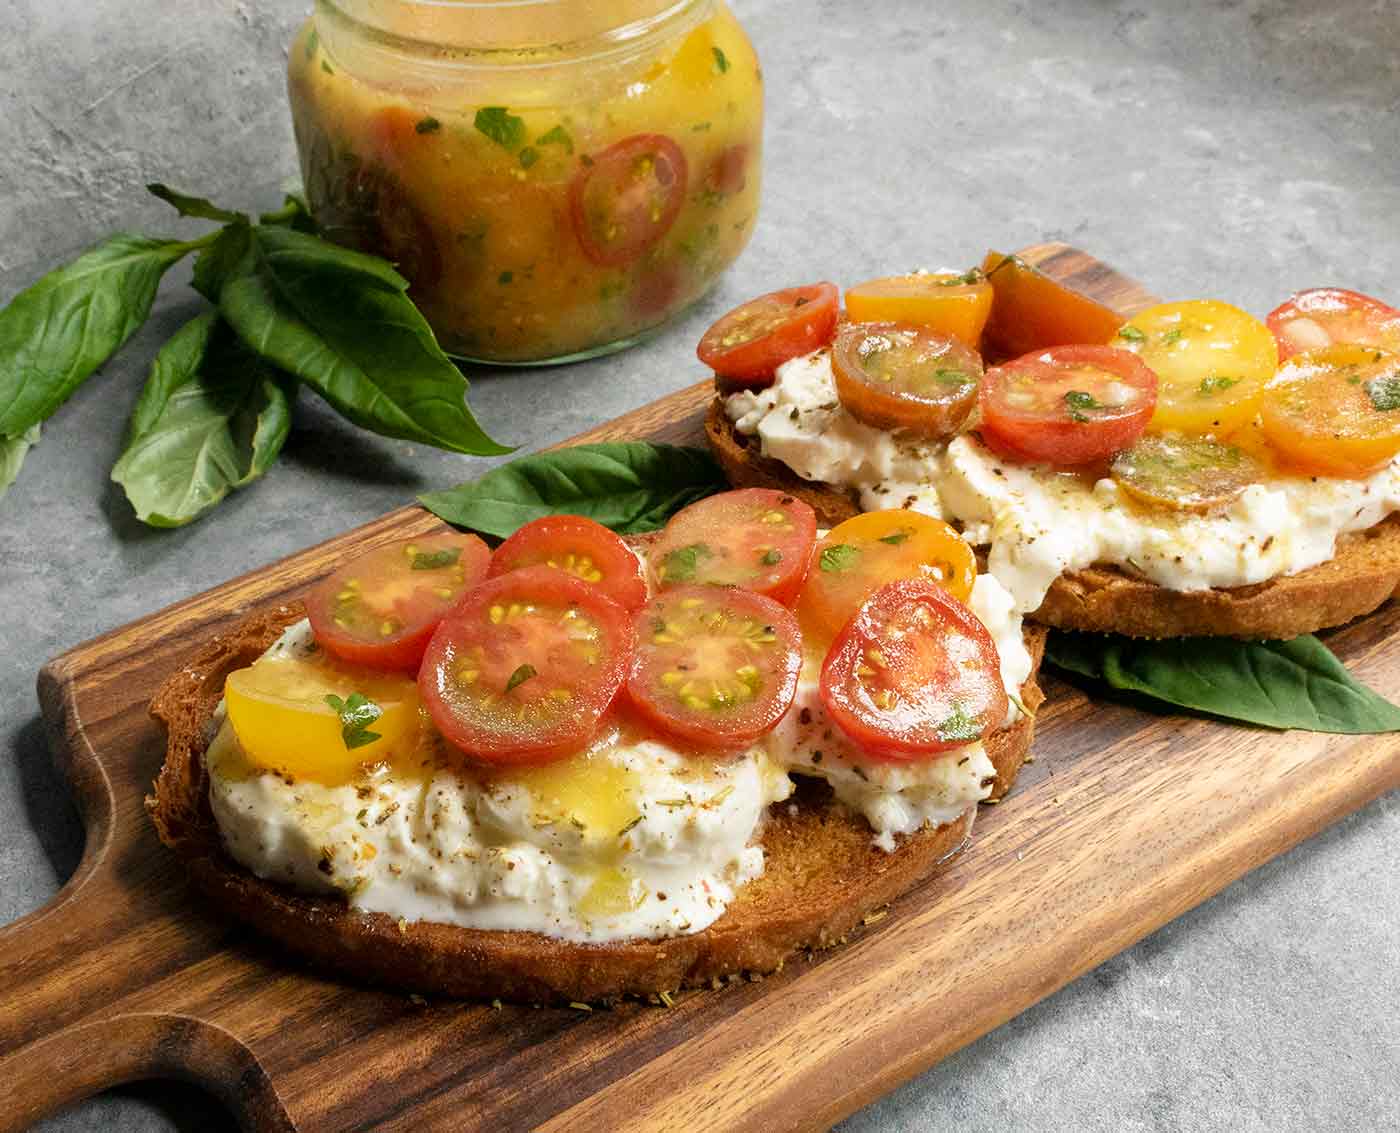 Side view of two slices of cherry tomato bruschetta, with a jar of marinated tomatoes in the background